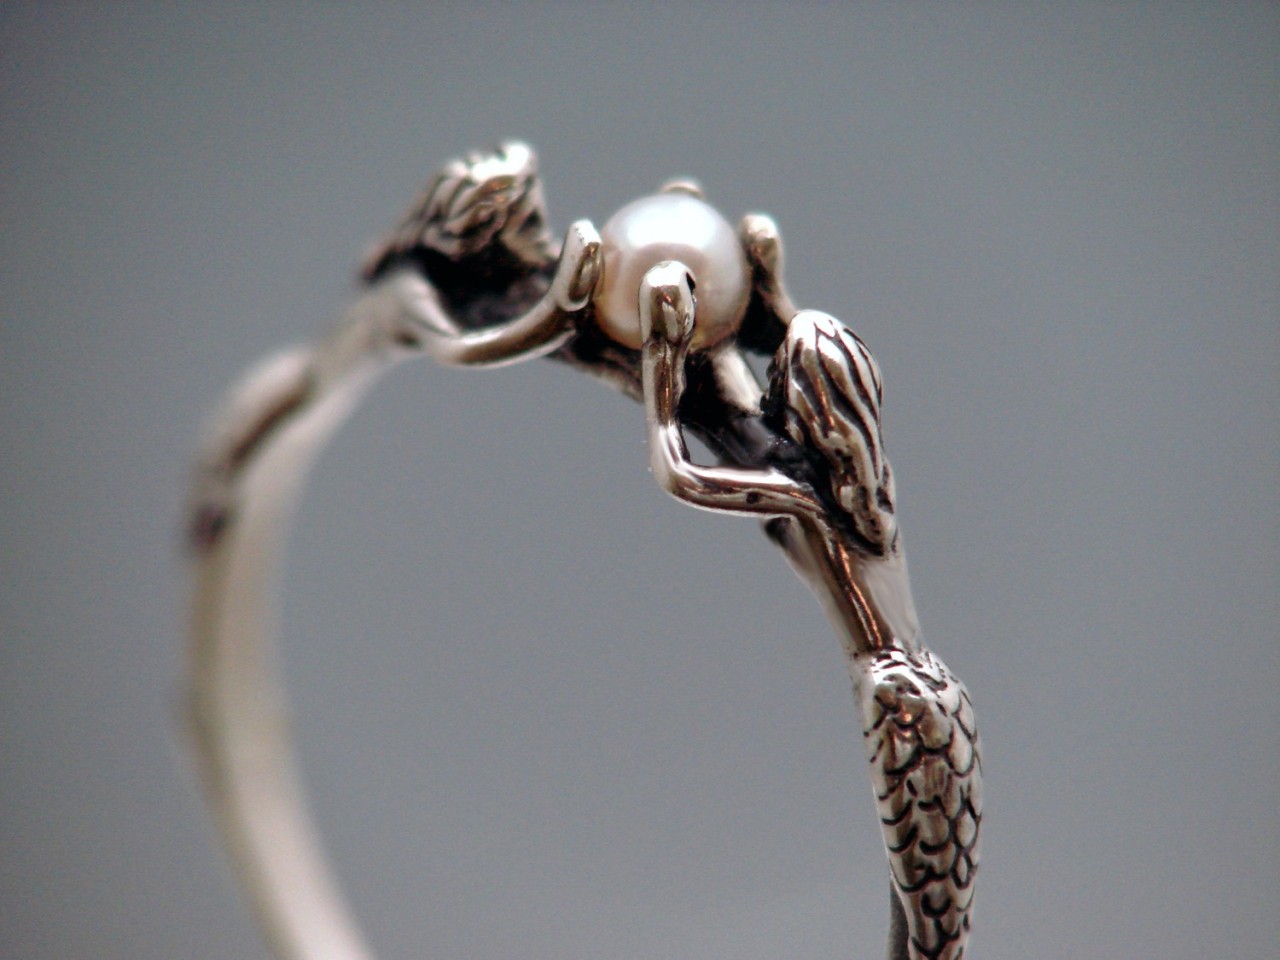  Twin Mermaid Ring Mermaids are one of the most widely known myths of the sea in